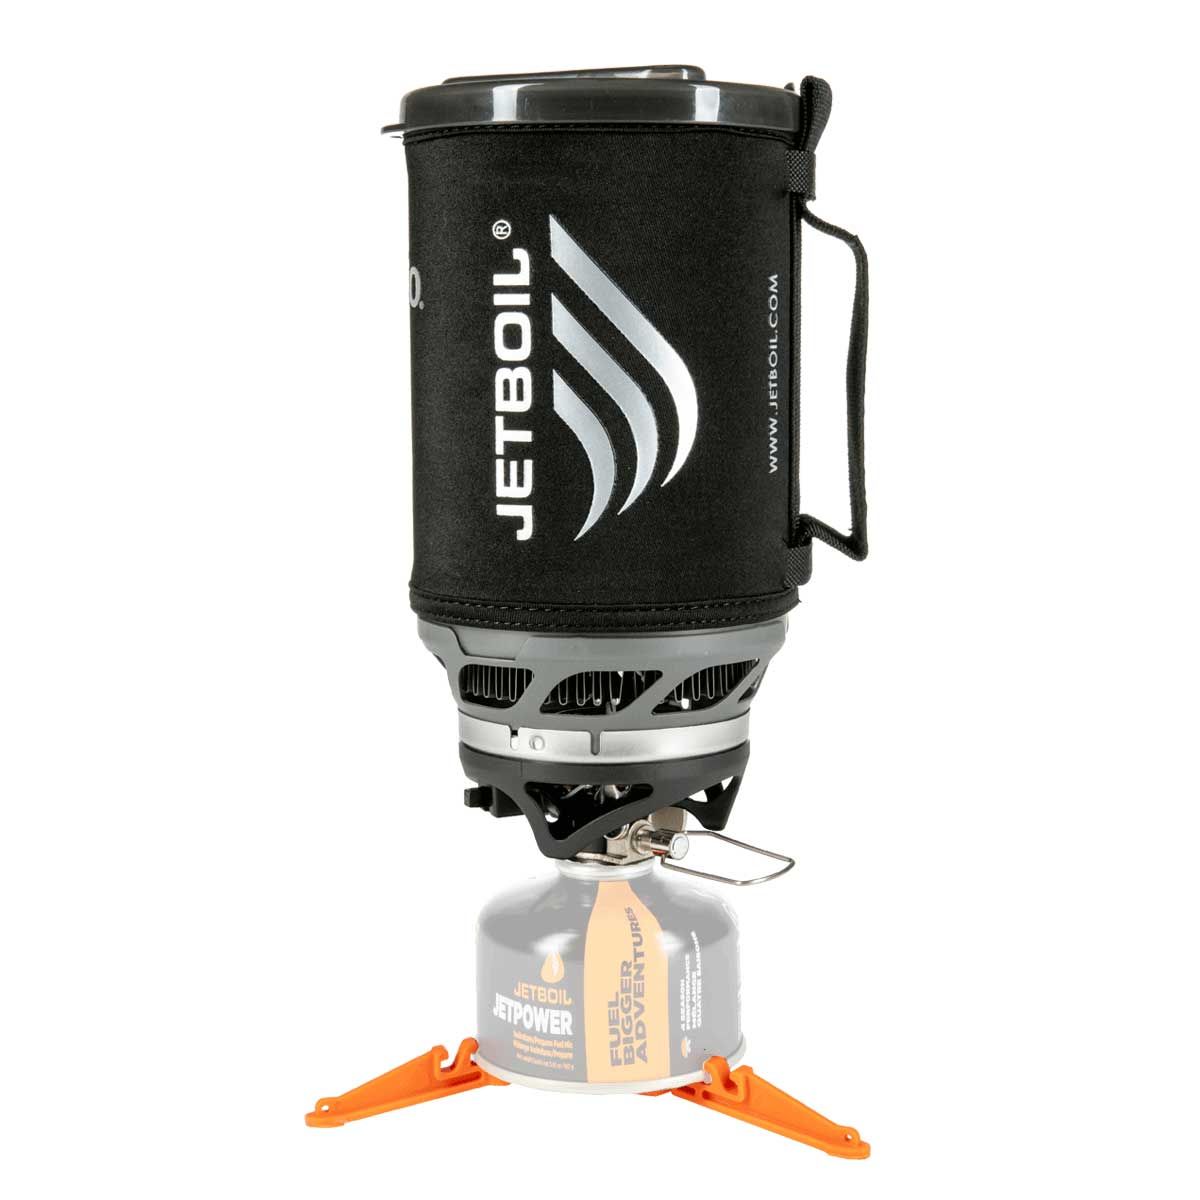 Jetboil MiniMo - 1.8L gas-regulated cooking system